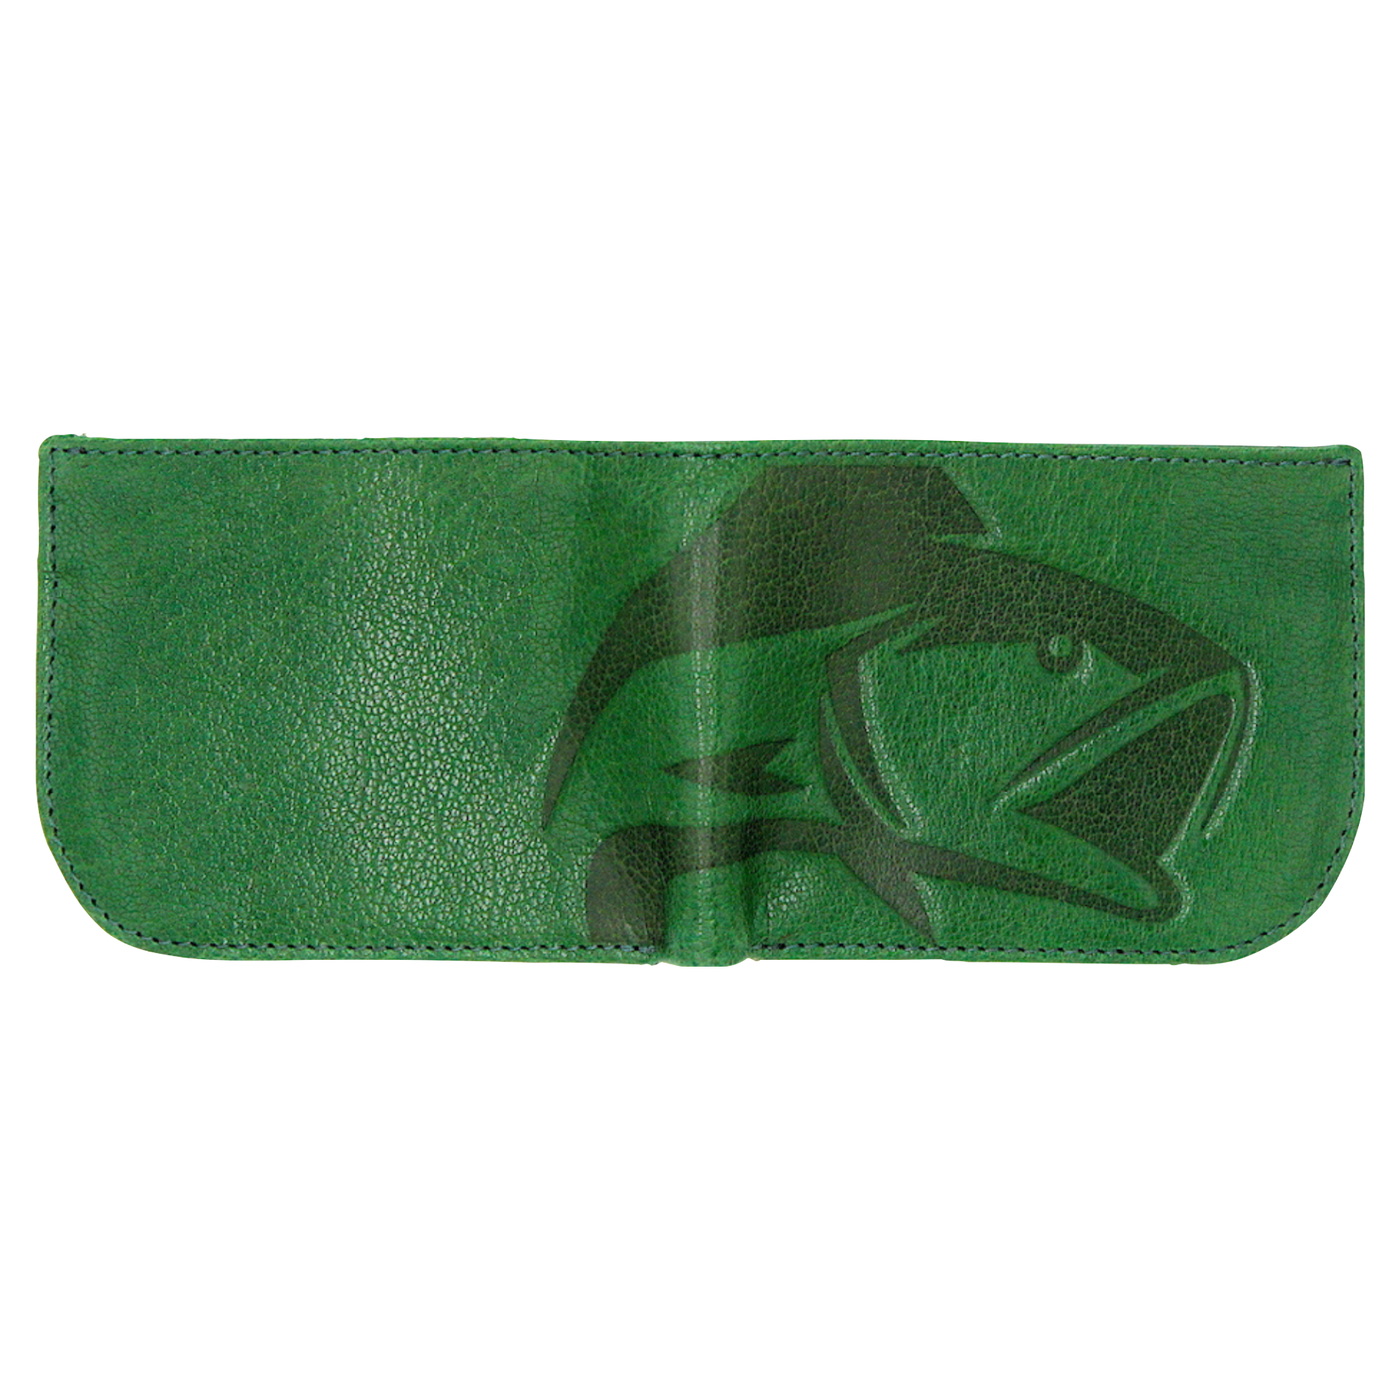 The Pursuit Bifold Radius Bass Wallet reflects the true elements of the angler with bold hand-dyed color, premier full grain leather, and a stylish debossed bass logo. Perfect for the avid fisher. 6 Hi-Viz Interior Card Slots 2 Storage Pockets Full-Length Bill Compartment Modern Style & Design Radius Comfort Corners Dimensions: 4.5"L x 3.5"H RFID Protection Color: Moss